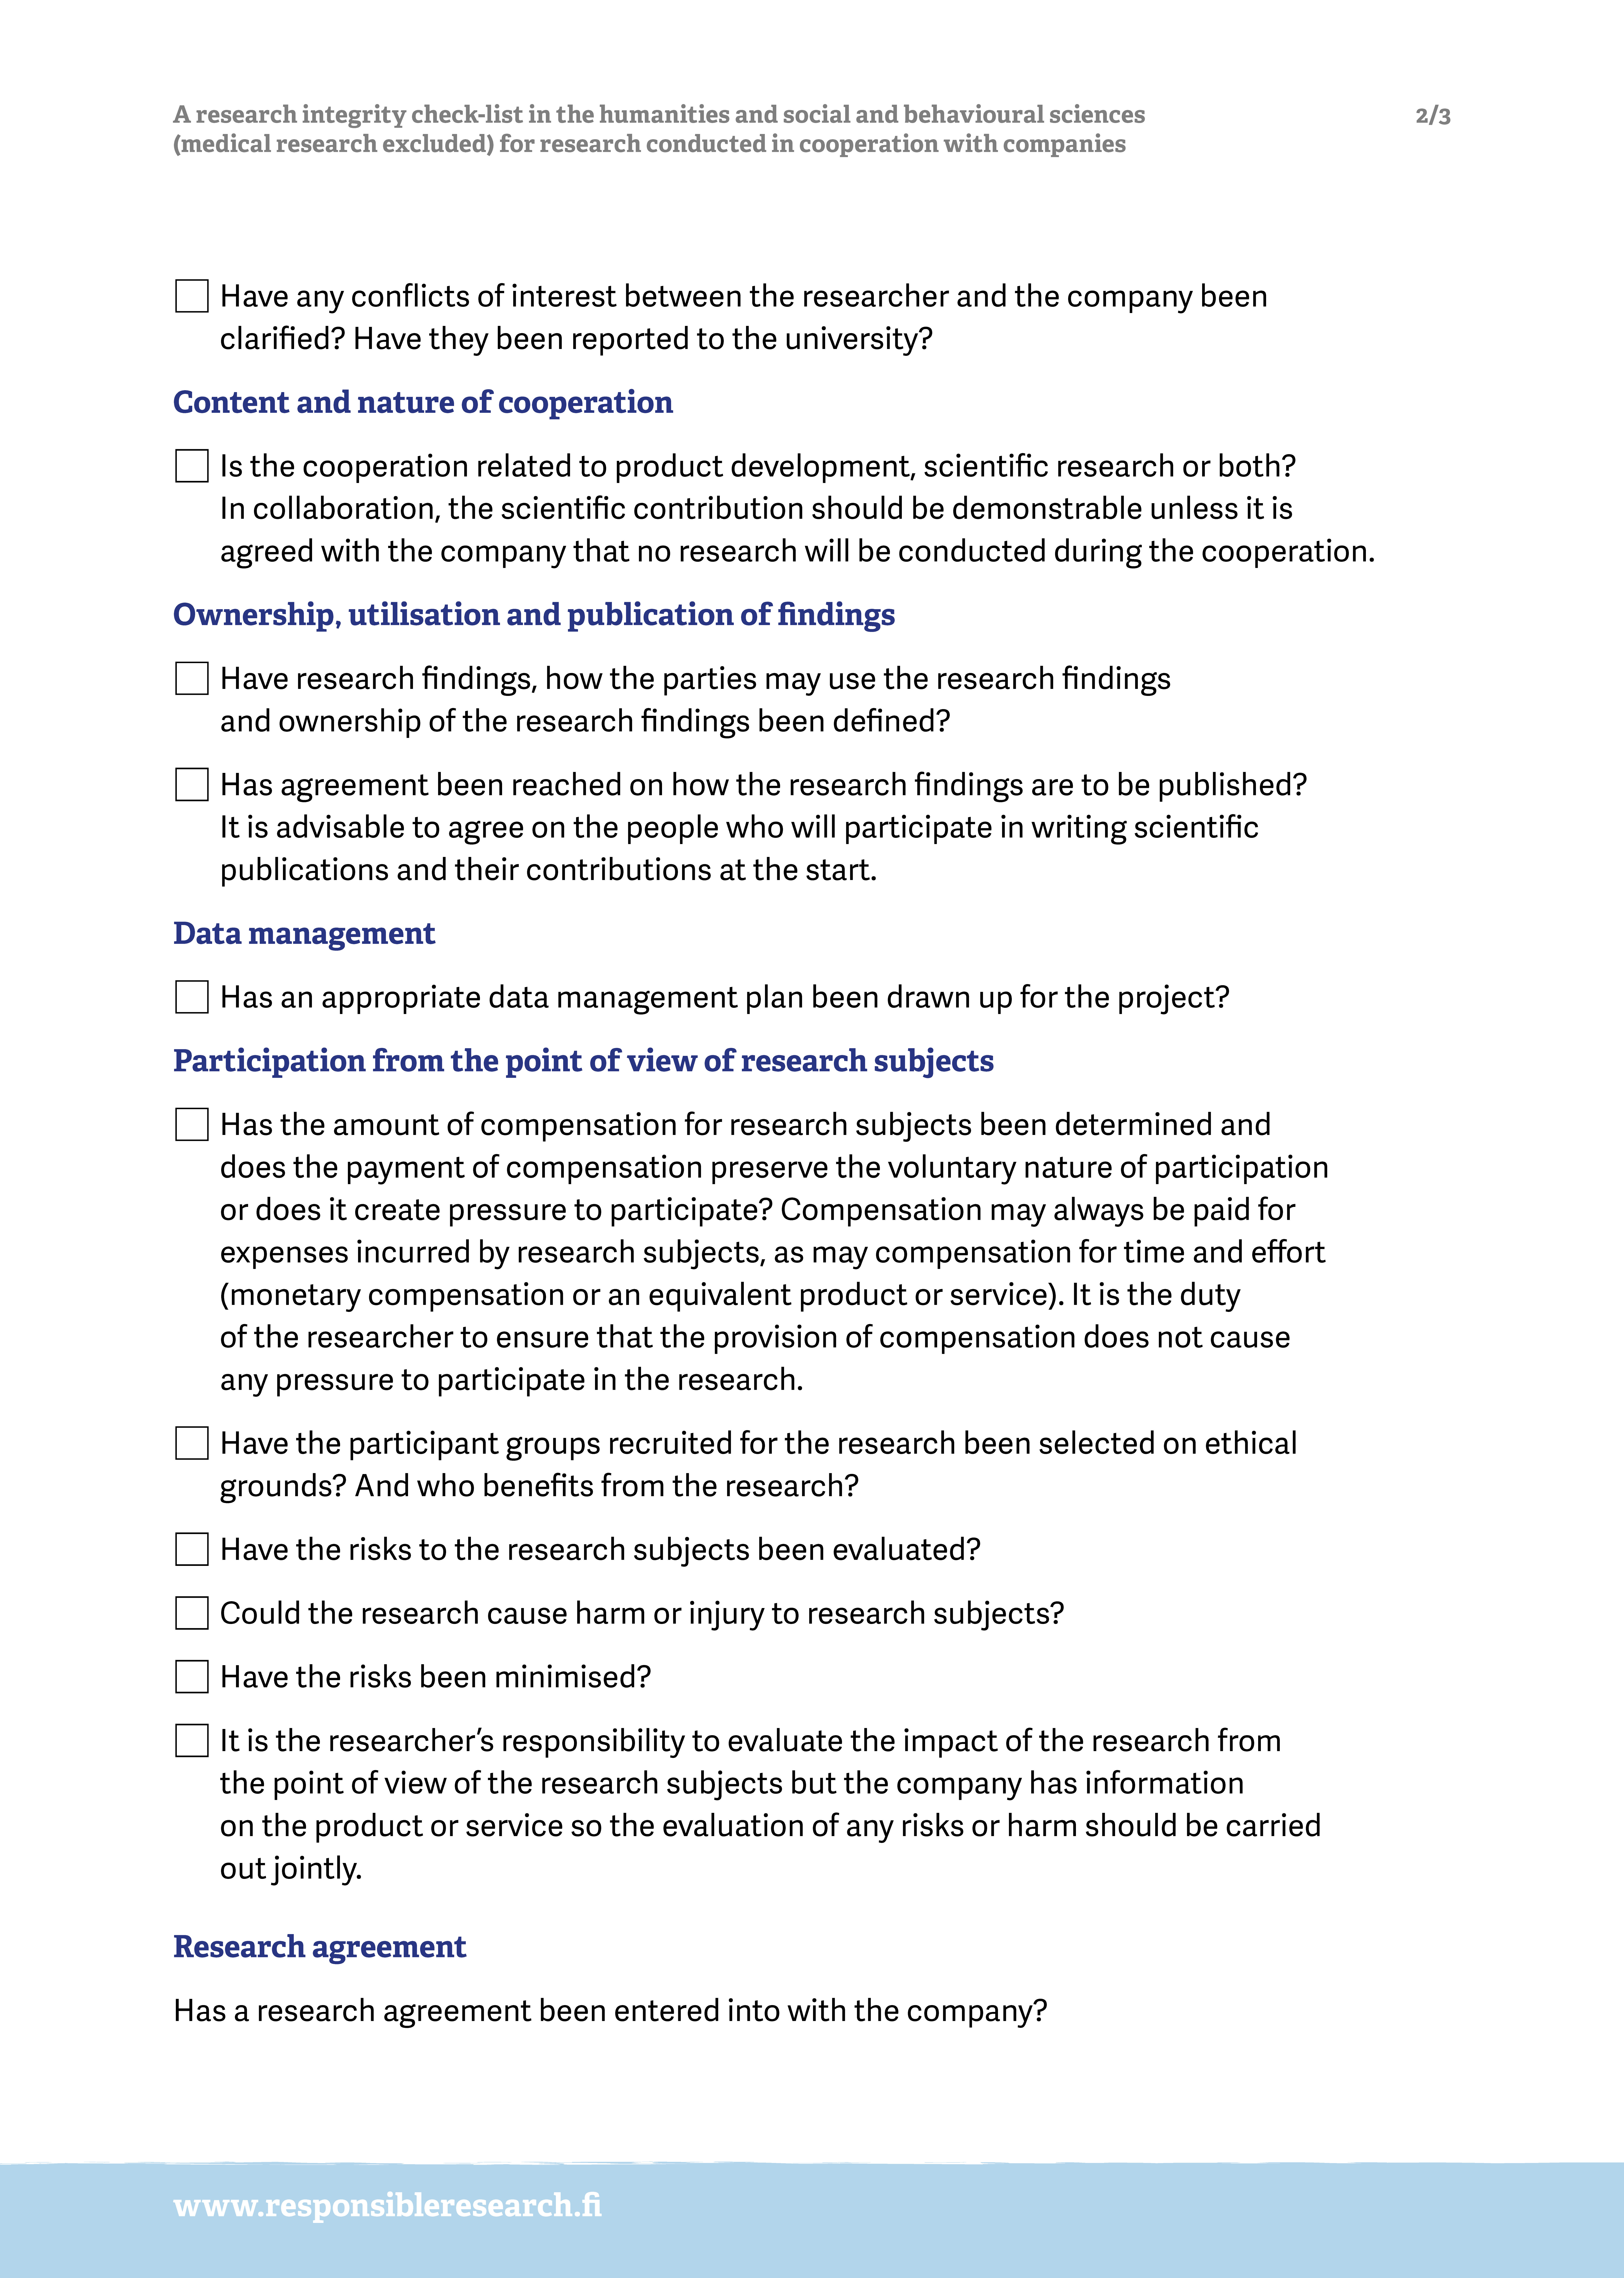 Page 2 of research integrity check-list in the humanities and social and behavioural sciences.